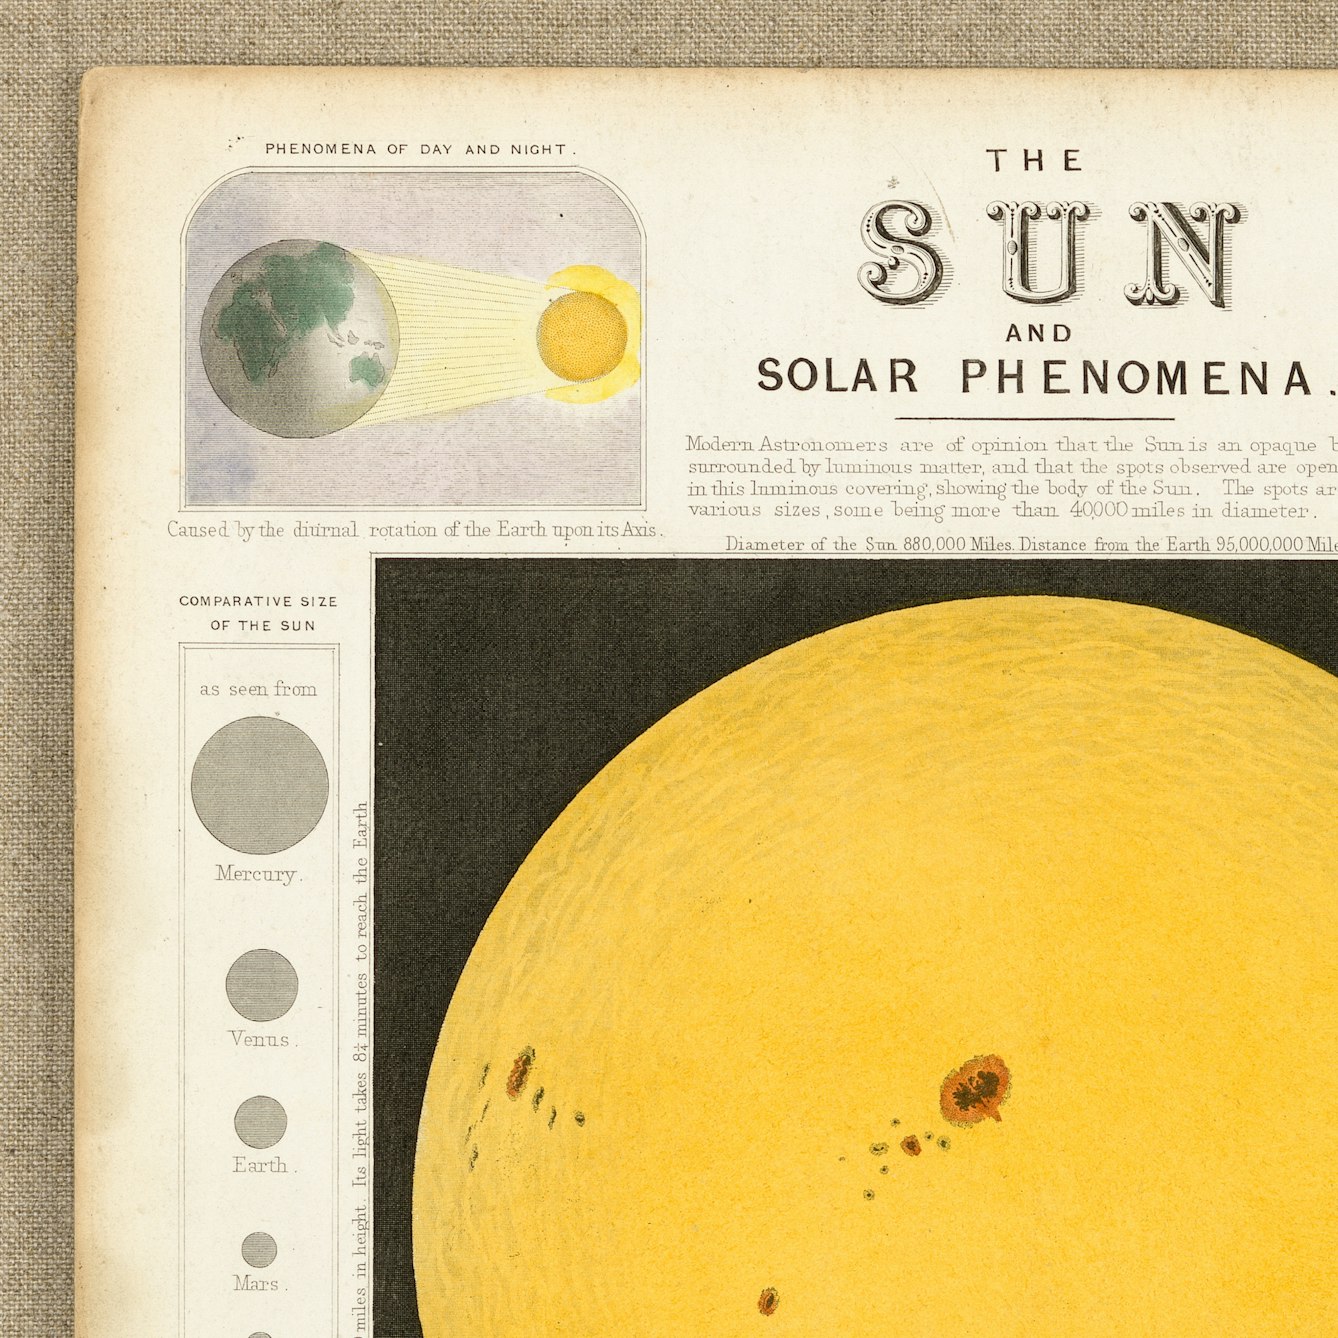 Photograph of the top half of a colour engraving showing the Sun and solar phenomena.